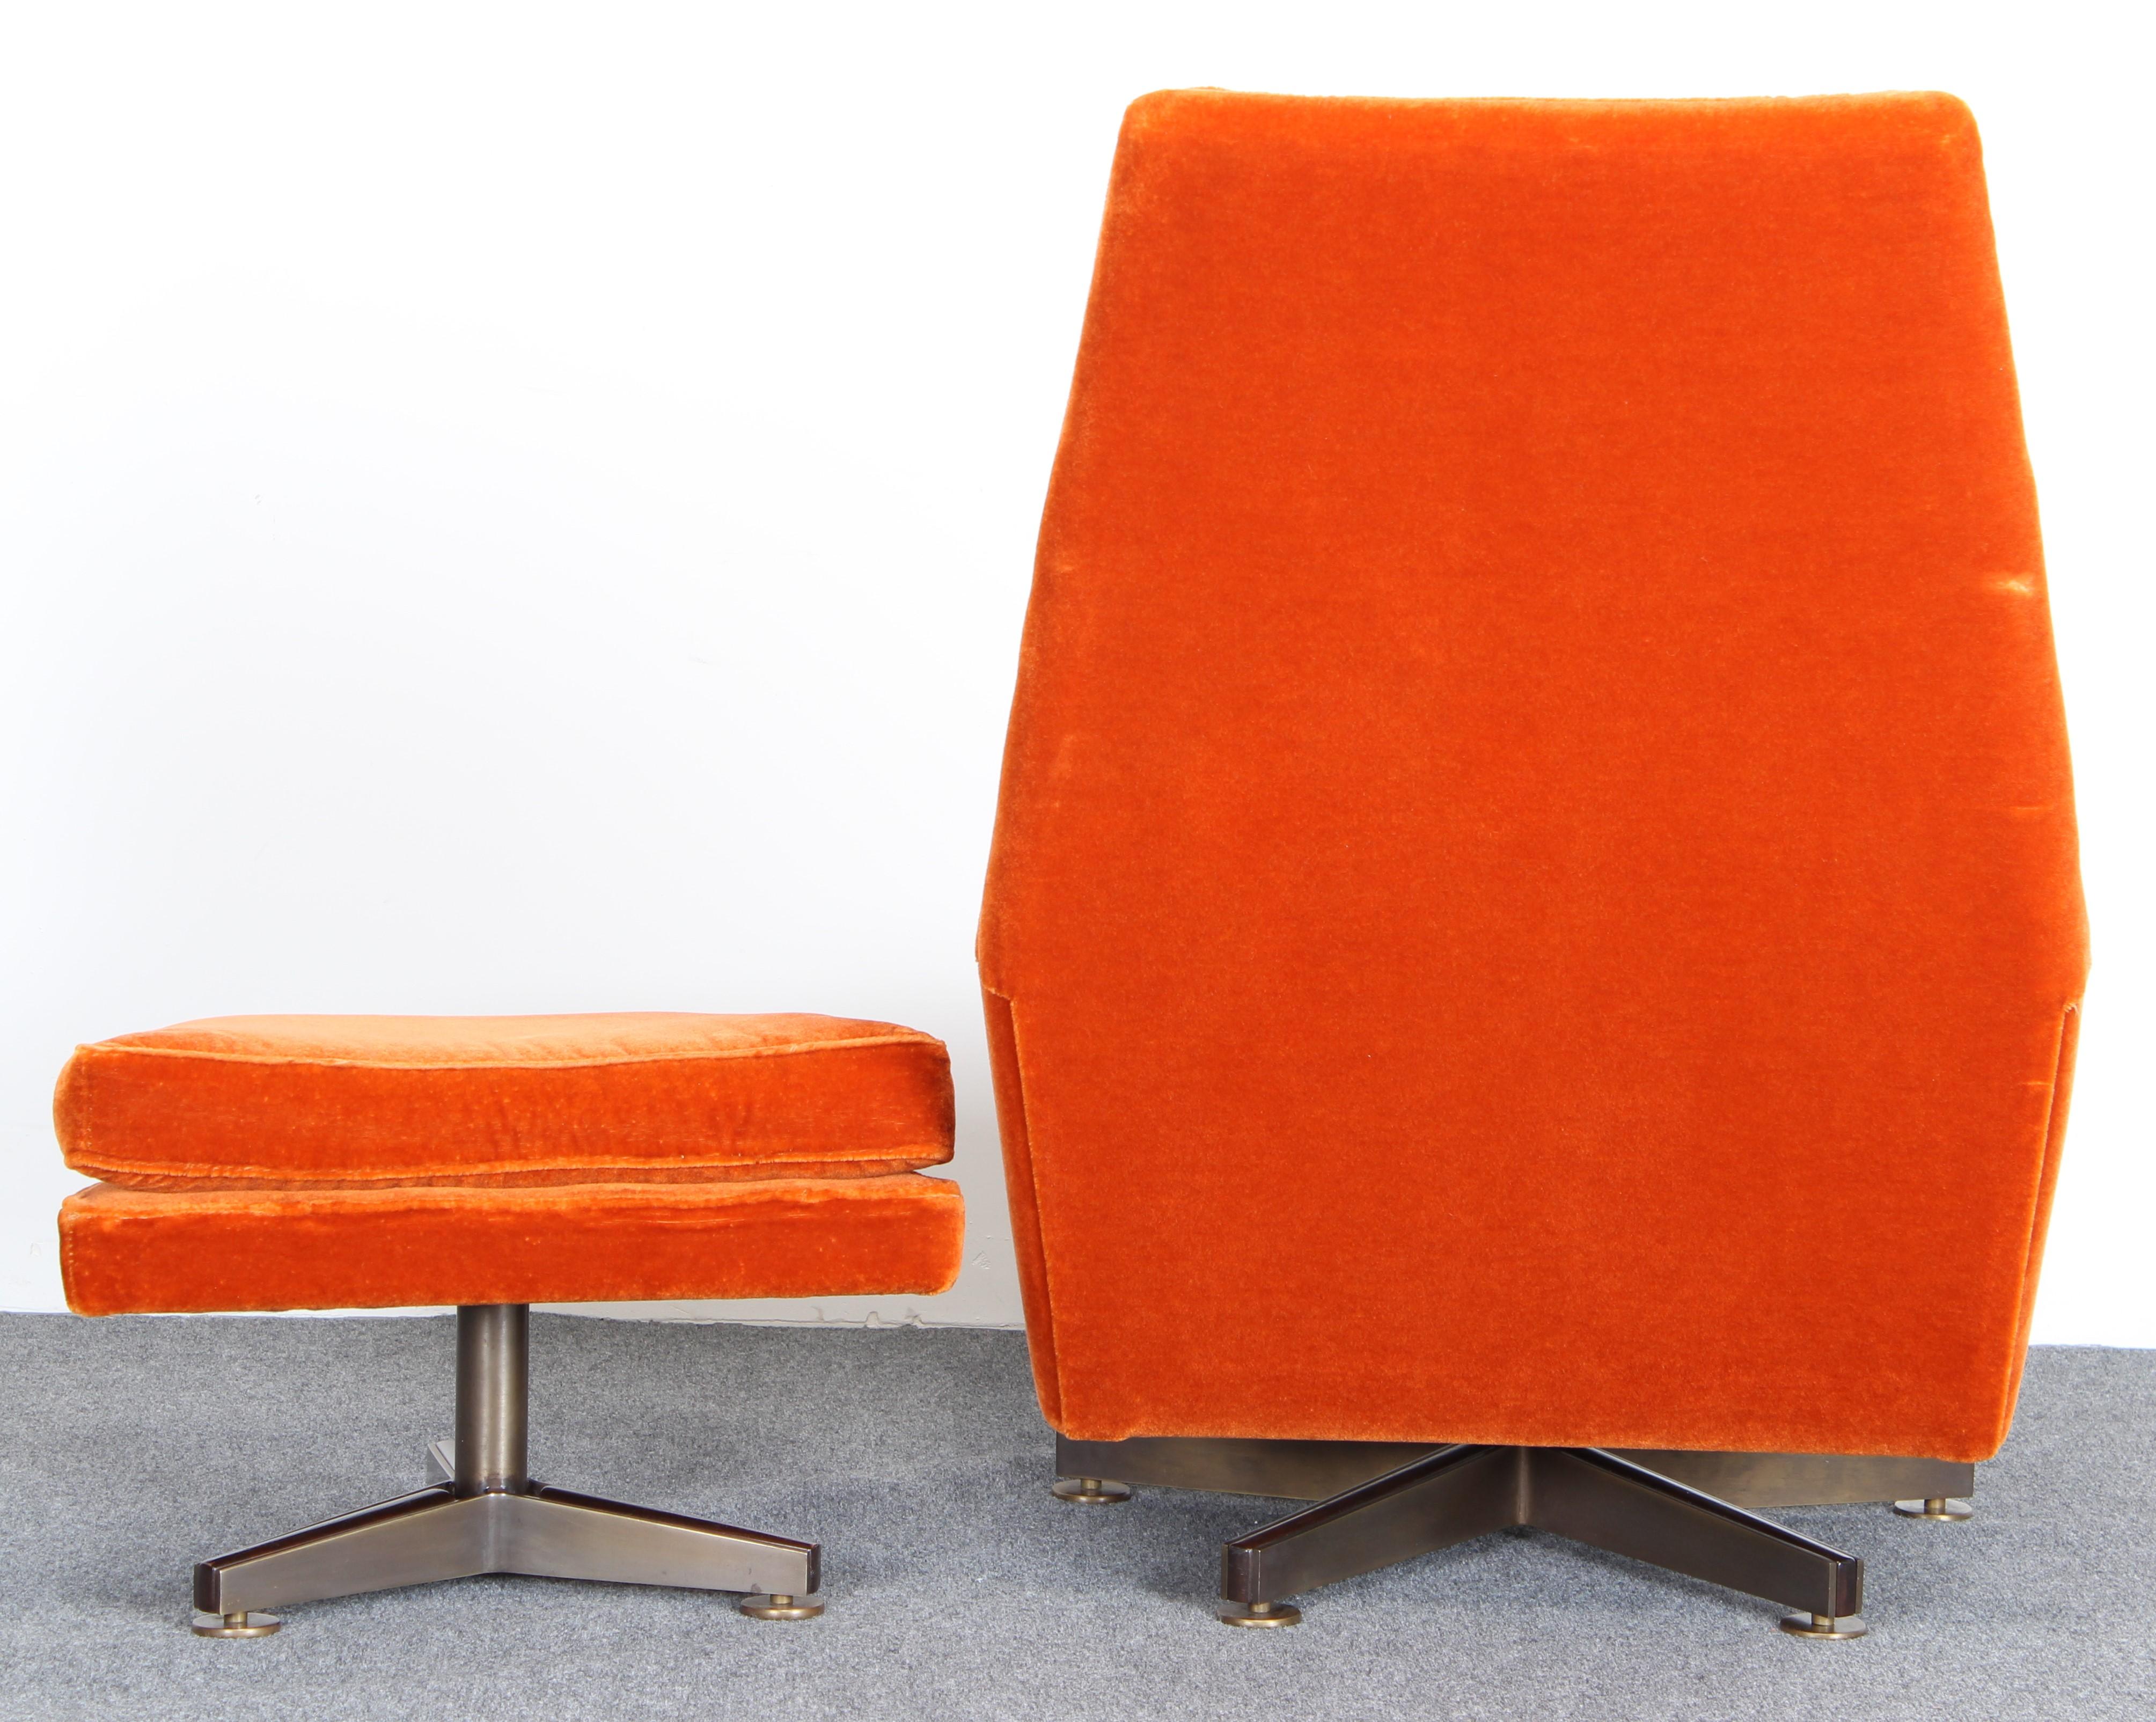 Mid-20th Century Edward Wormley Swivel Lounge Chair and Ottoman for Dunbar, 1960 For Sale